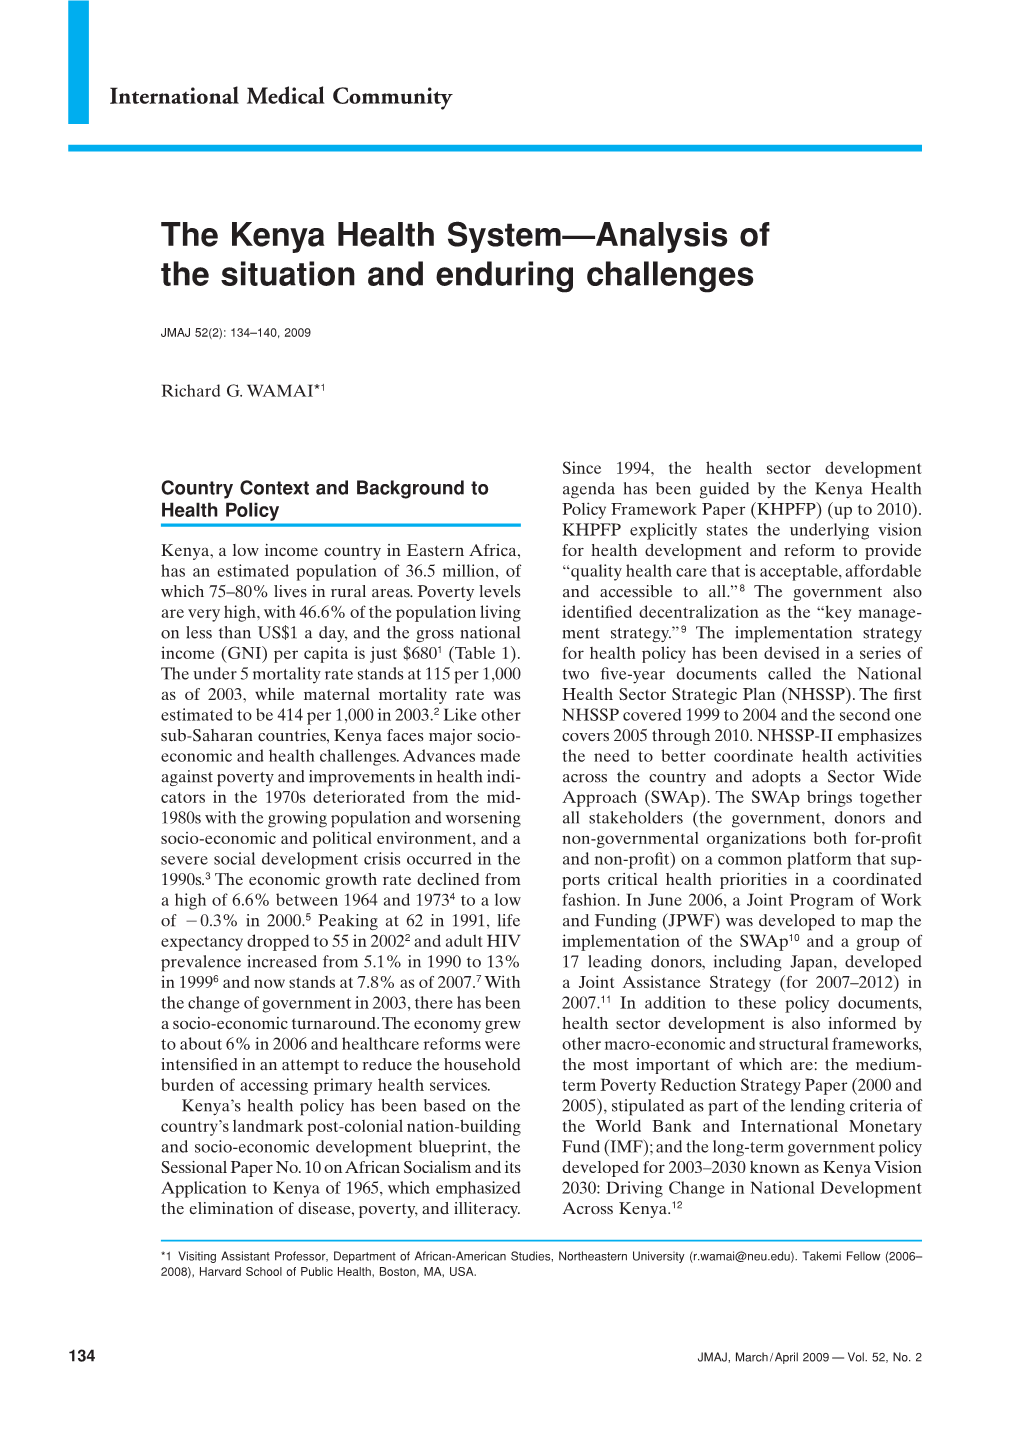 The Kenya Health System—Analysis of the Situation and Enduring Challenges